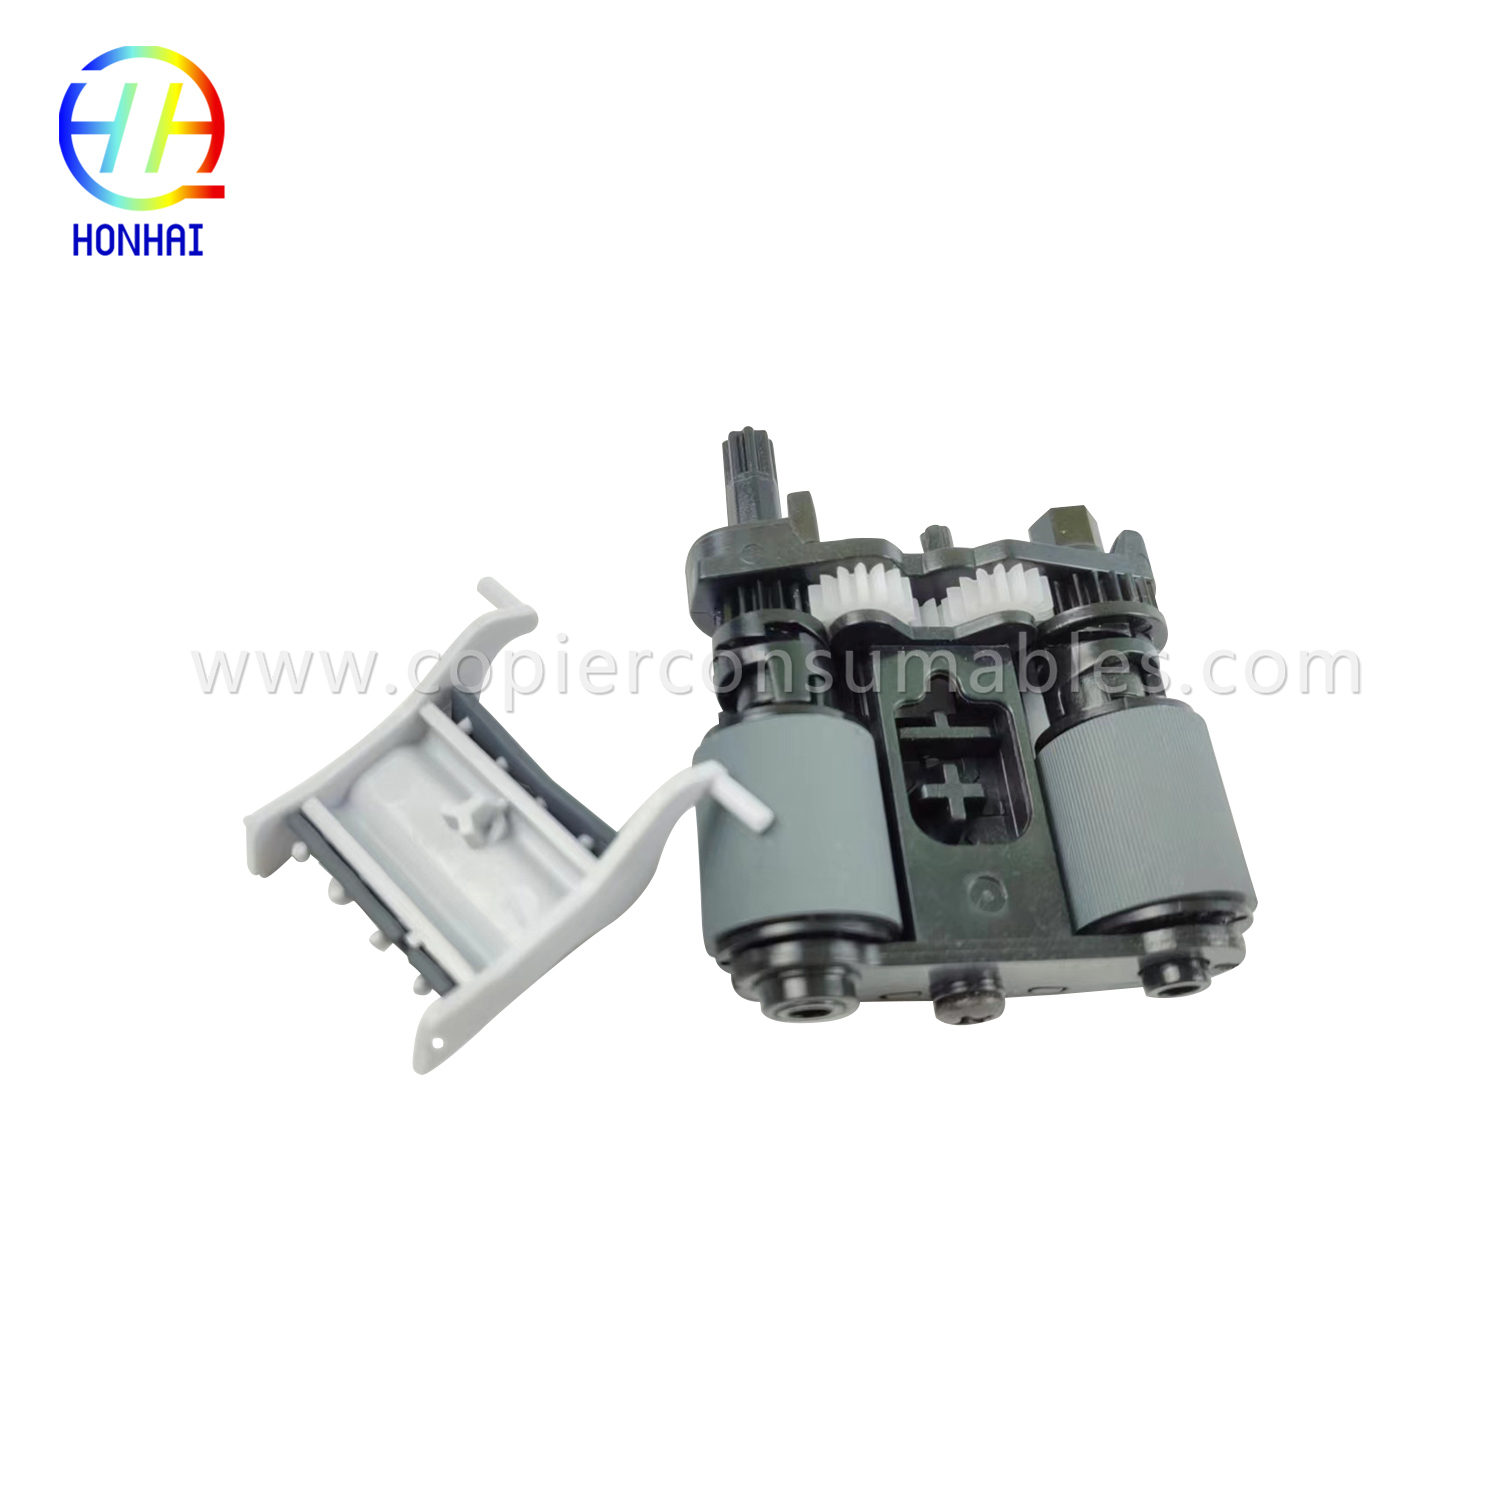 ADF Pickup Roller Assembly for HP Color LaserJet Pro MFP M281fdw M377dw M477fdn M477fdw M477fnw M426fdn M426fdw B3Q10-60105 (2)